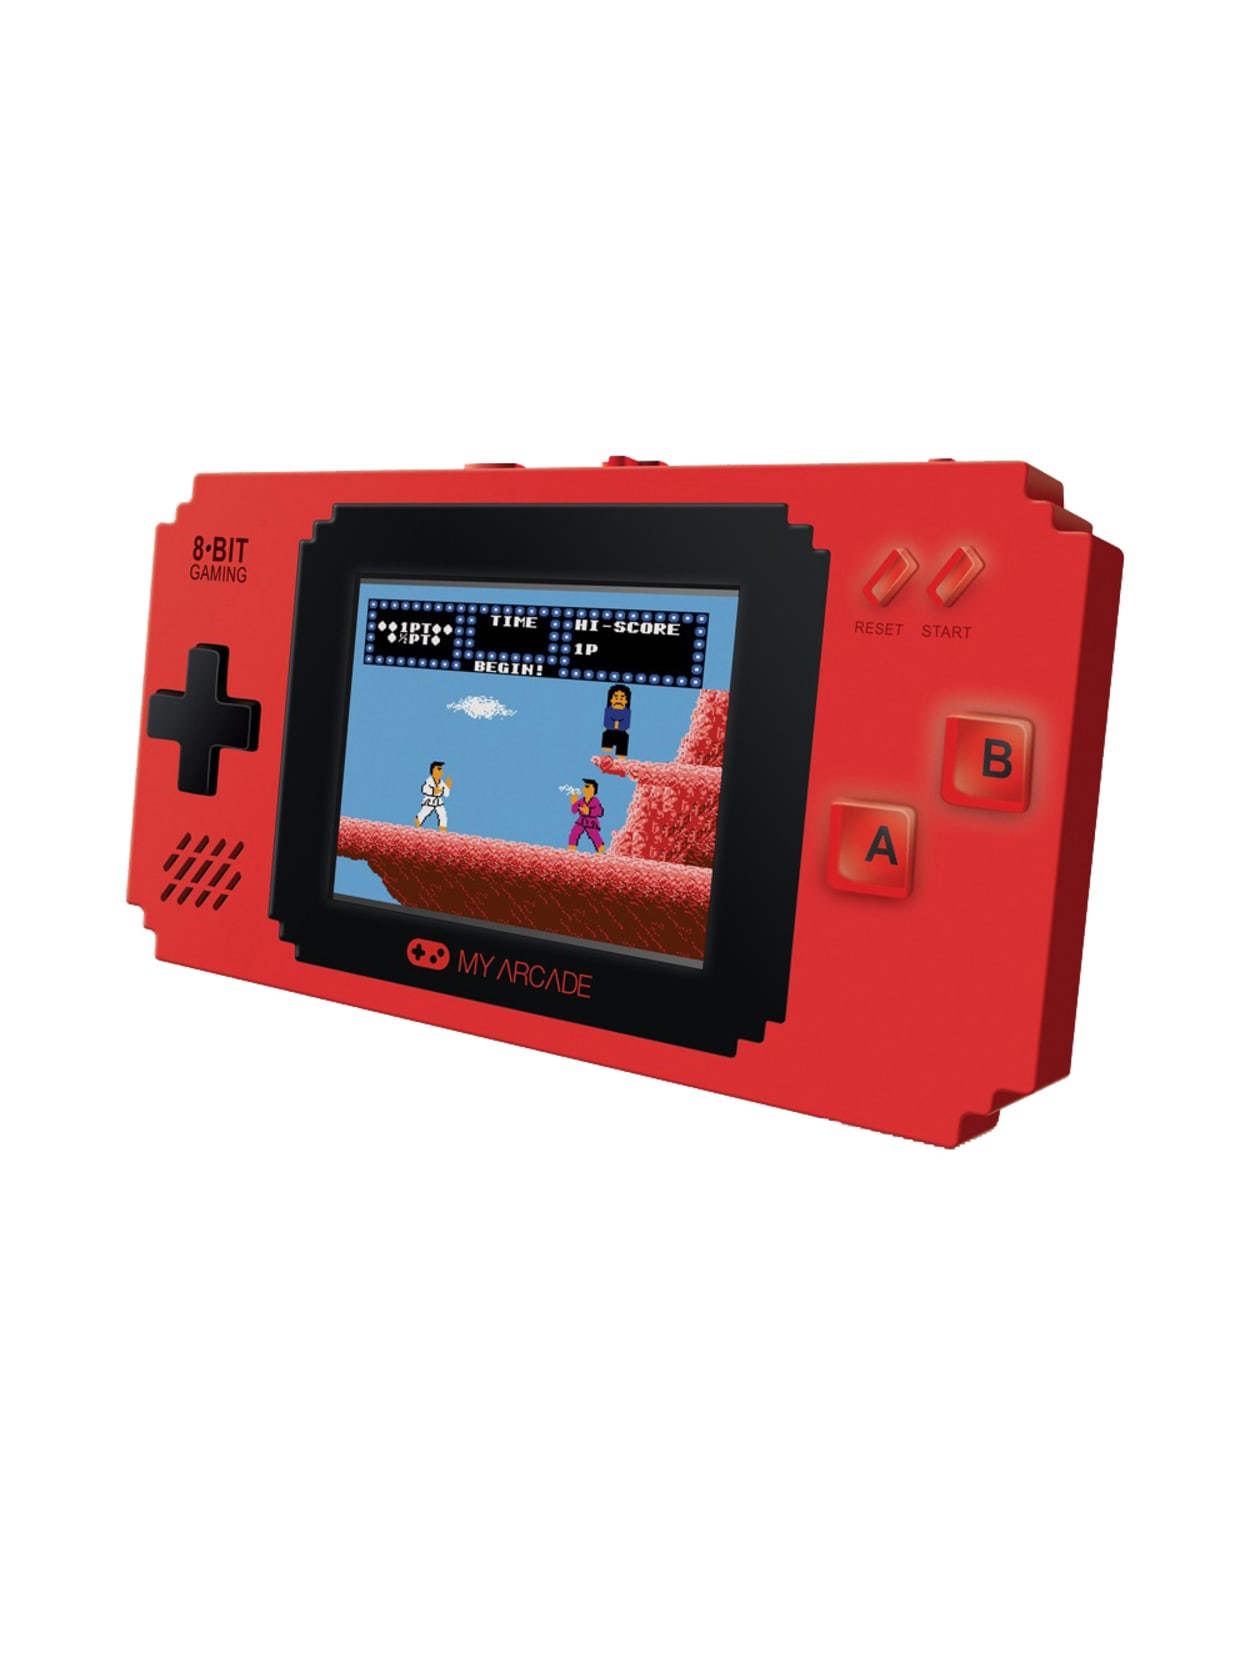 games portable gaming system